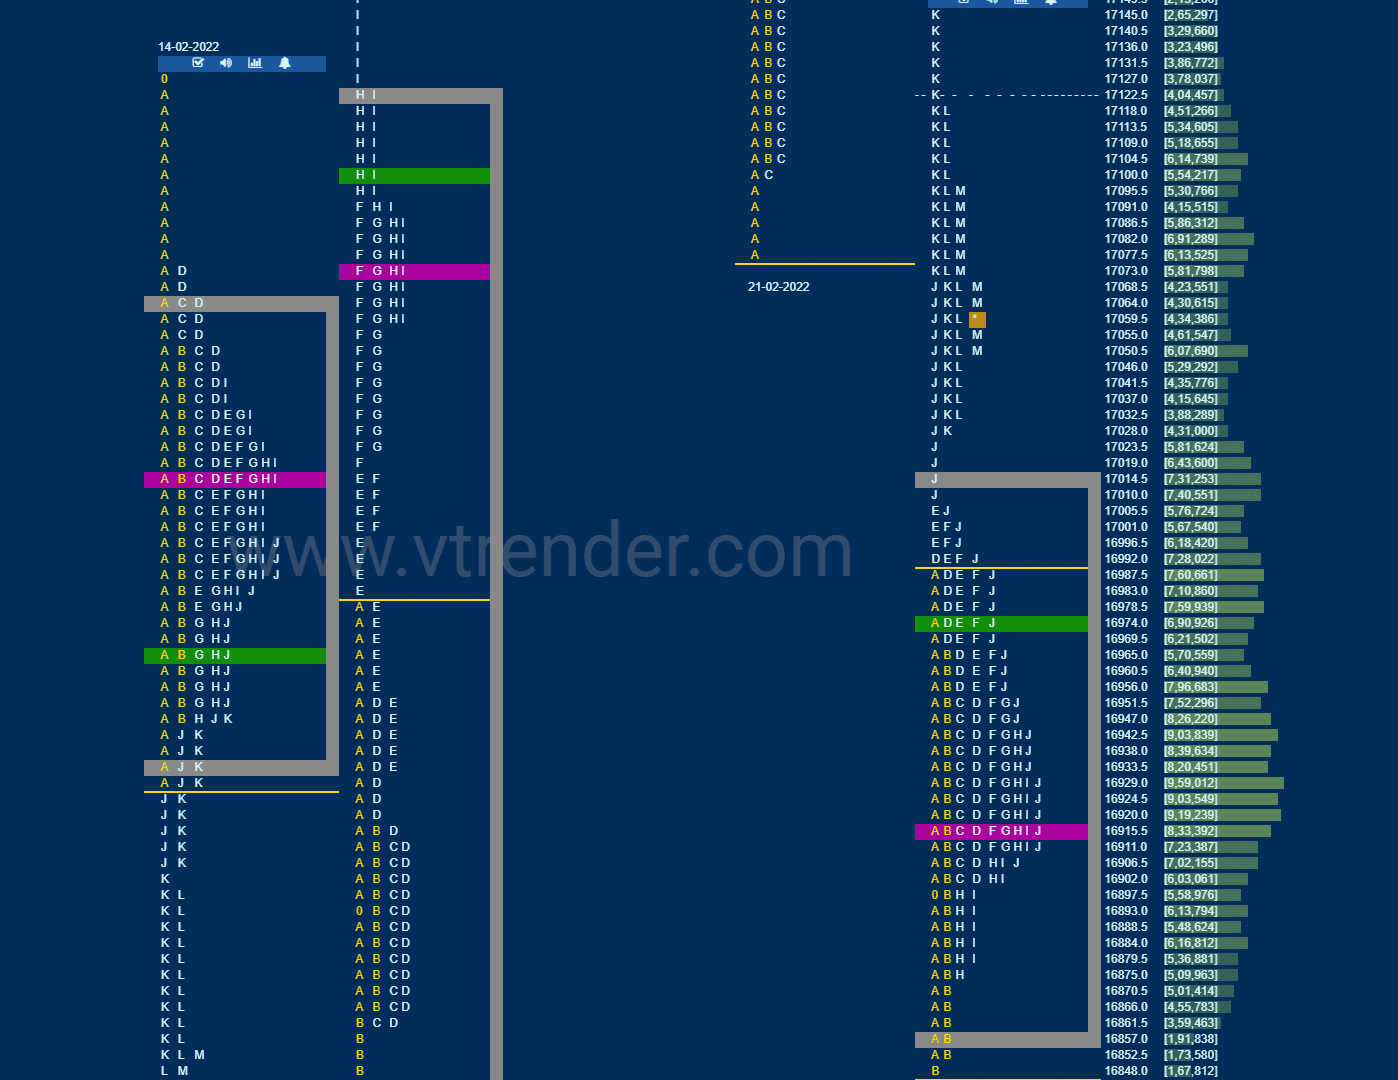 Nf 15 Market Profile Analysis Dated 22Nd February 2022 Banknifty Futures, Charts, Day Trading, Intraday Trading, Intraday Trading Strategies, Market Profile, Market Profile Trading Strategies, Nifty Futures, Order Flow Analysis, Support And Resistance, Technical Analysis, Trading Strategies, Volume Profile Trading